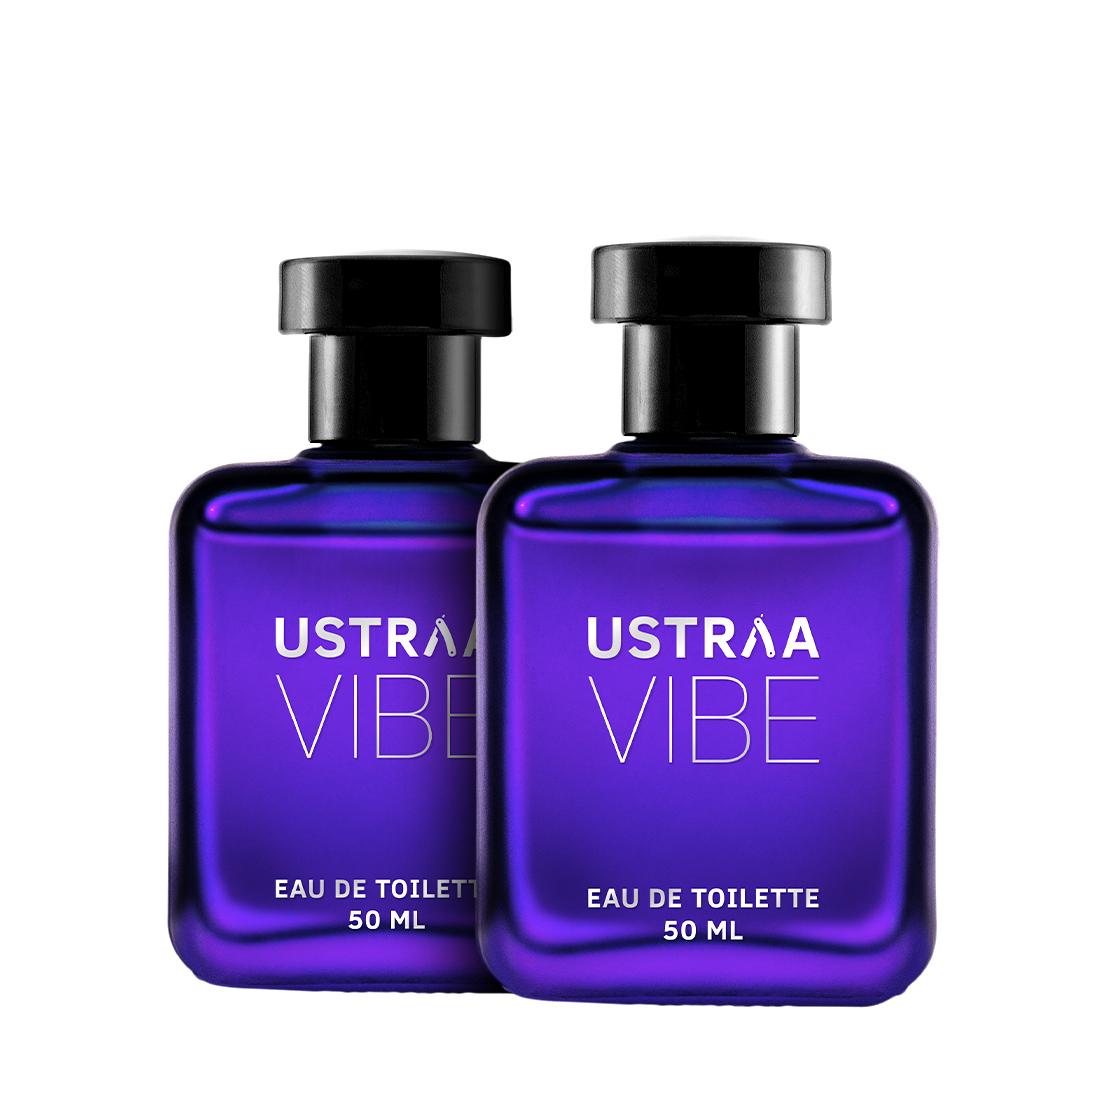 Ustraa Vibe Perfume set of 2 for Men Fragrance that complements your vibe